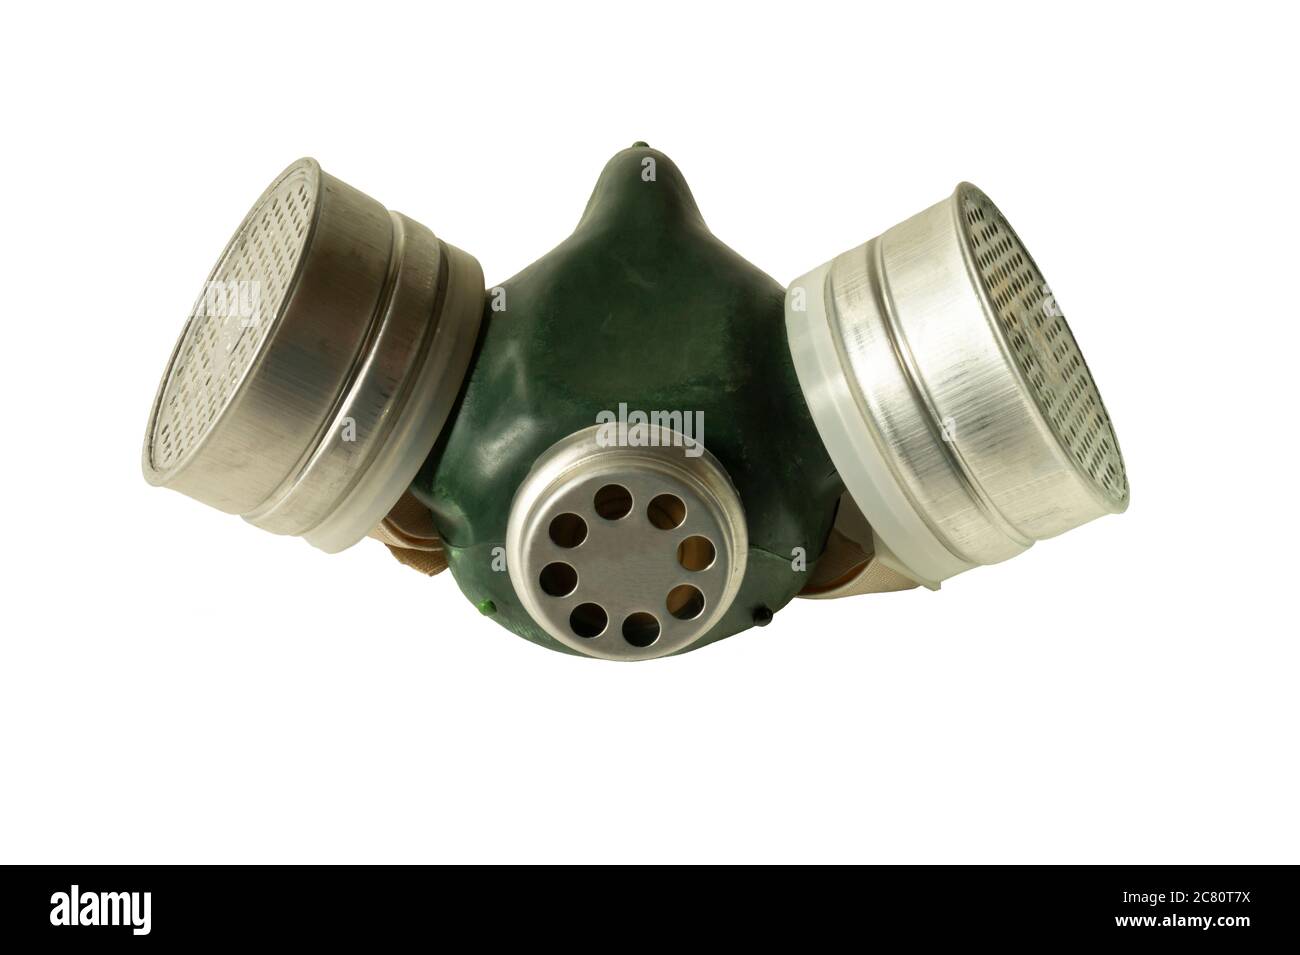 The Mask respirator with valve insulated on white background. Equipment for breathing in polluted to ambience. Stock Photo